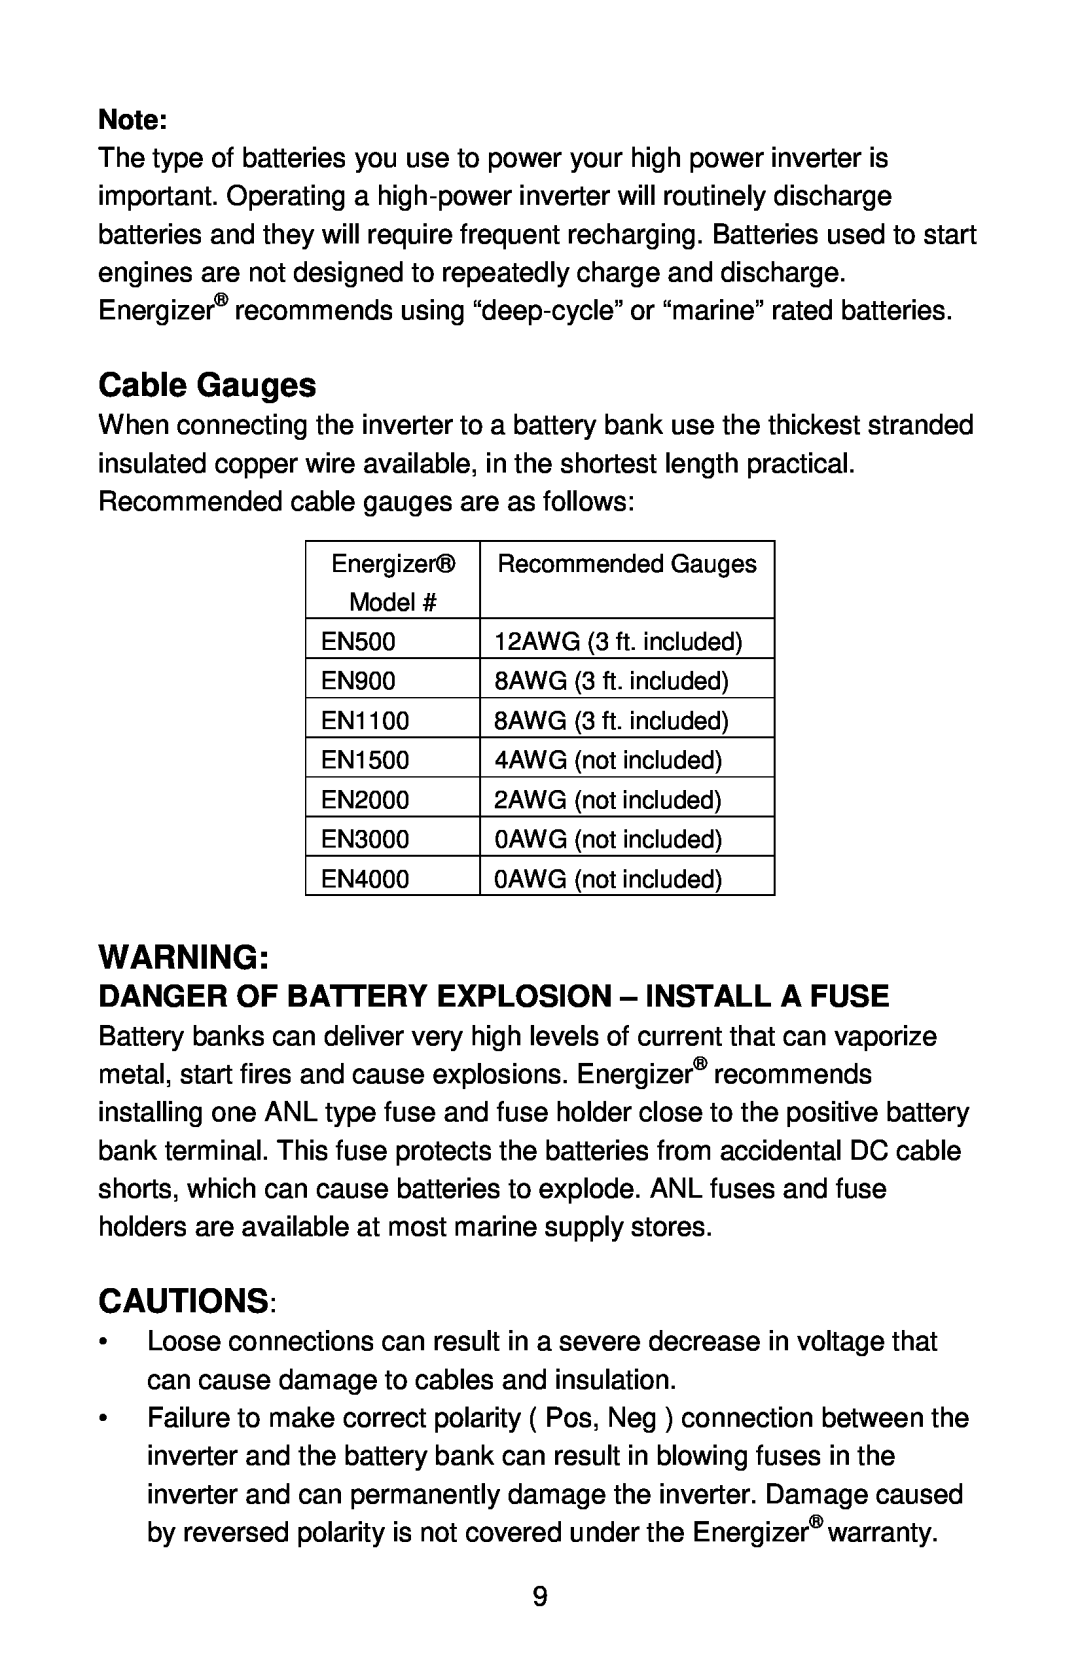 Energizer EN1100 manual Cable Gauges, Cautions, Danger Of Battery Explosion - Install A Fuse 